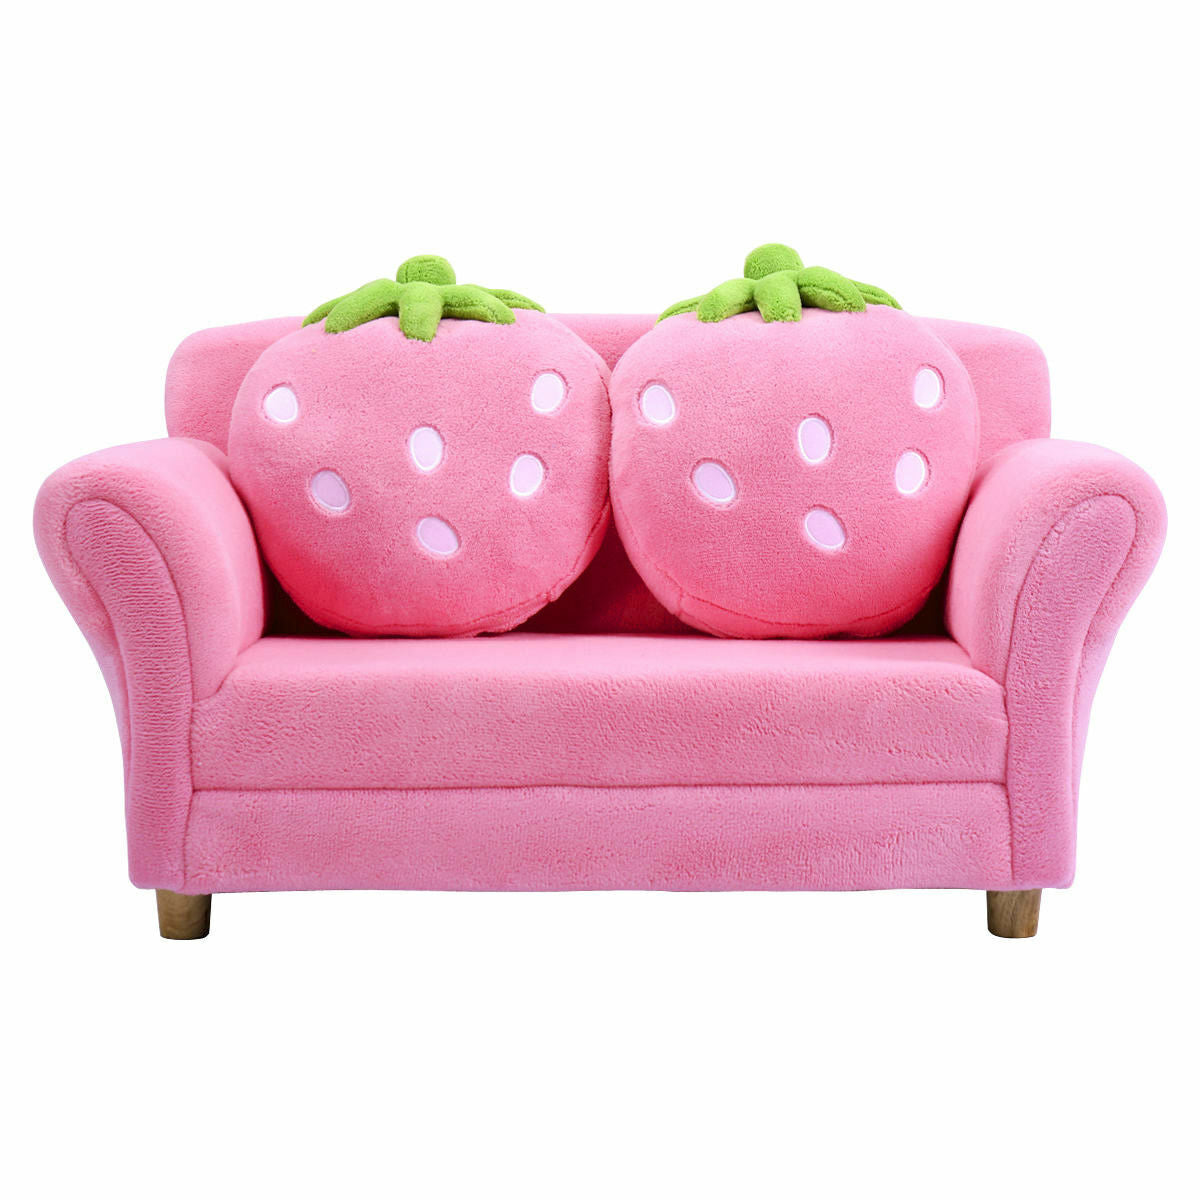 Kids Strawberry Sofa Lounge Chair with Pillows